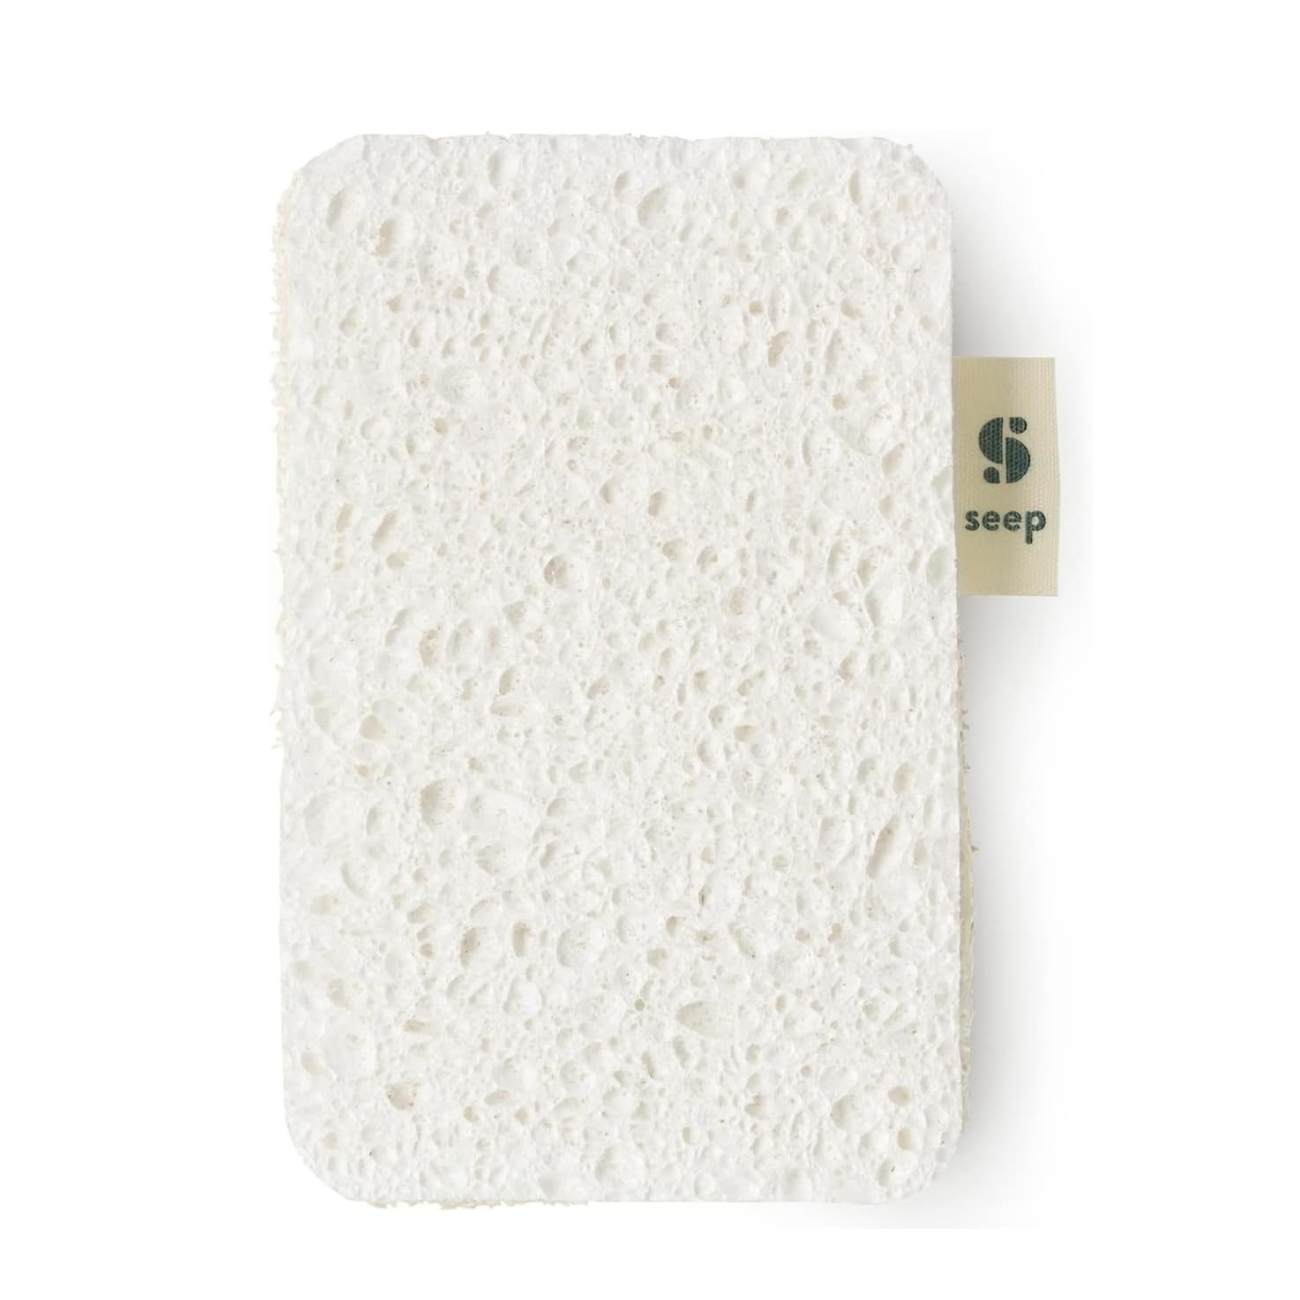 Compostable Sponge with Loofah Scourer Pack of 4 80g